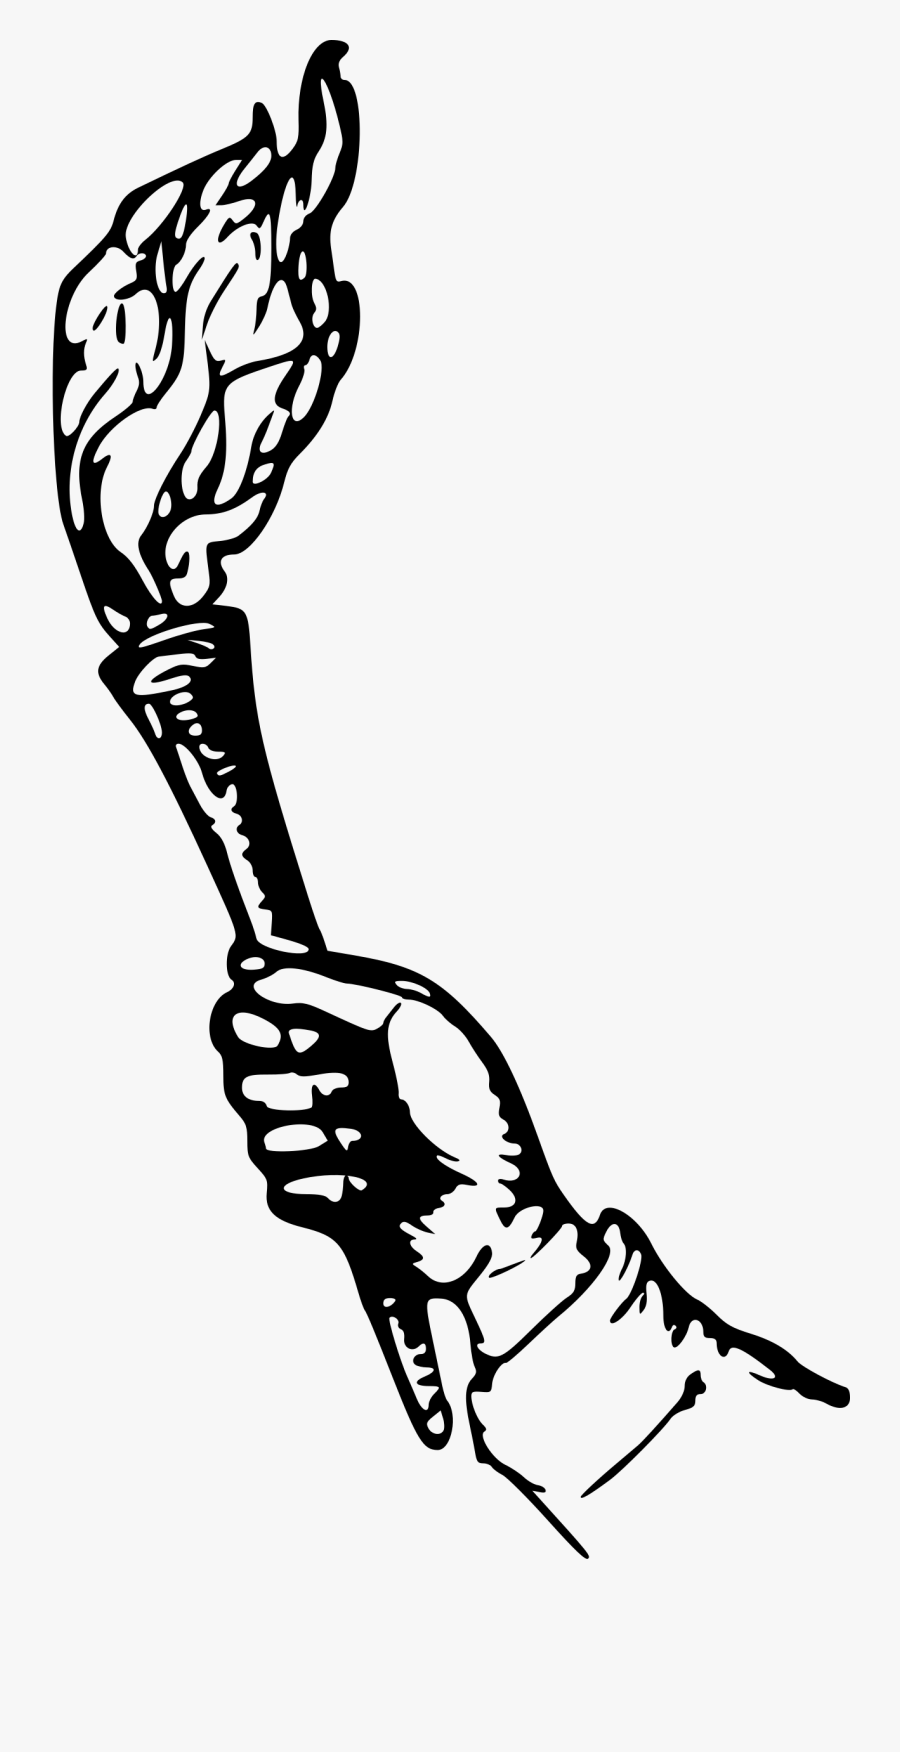 Hand Holding Book Drawing - Hand Holding Torch Png, Transparent Clipart